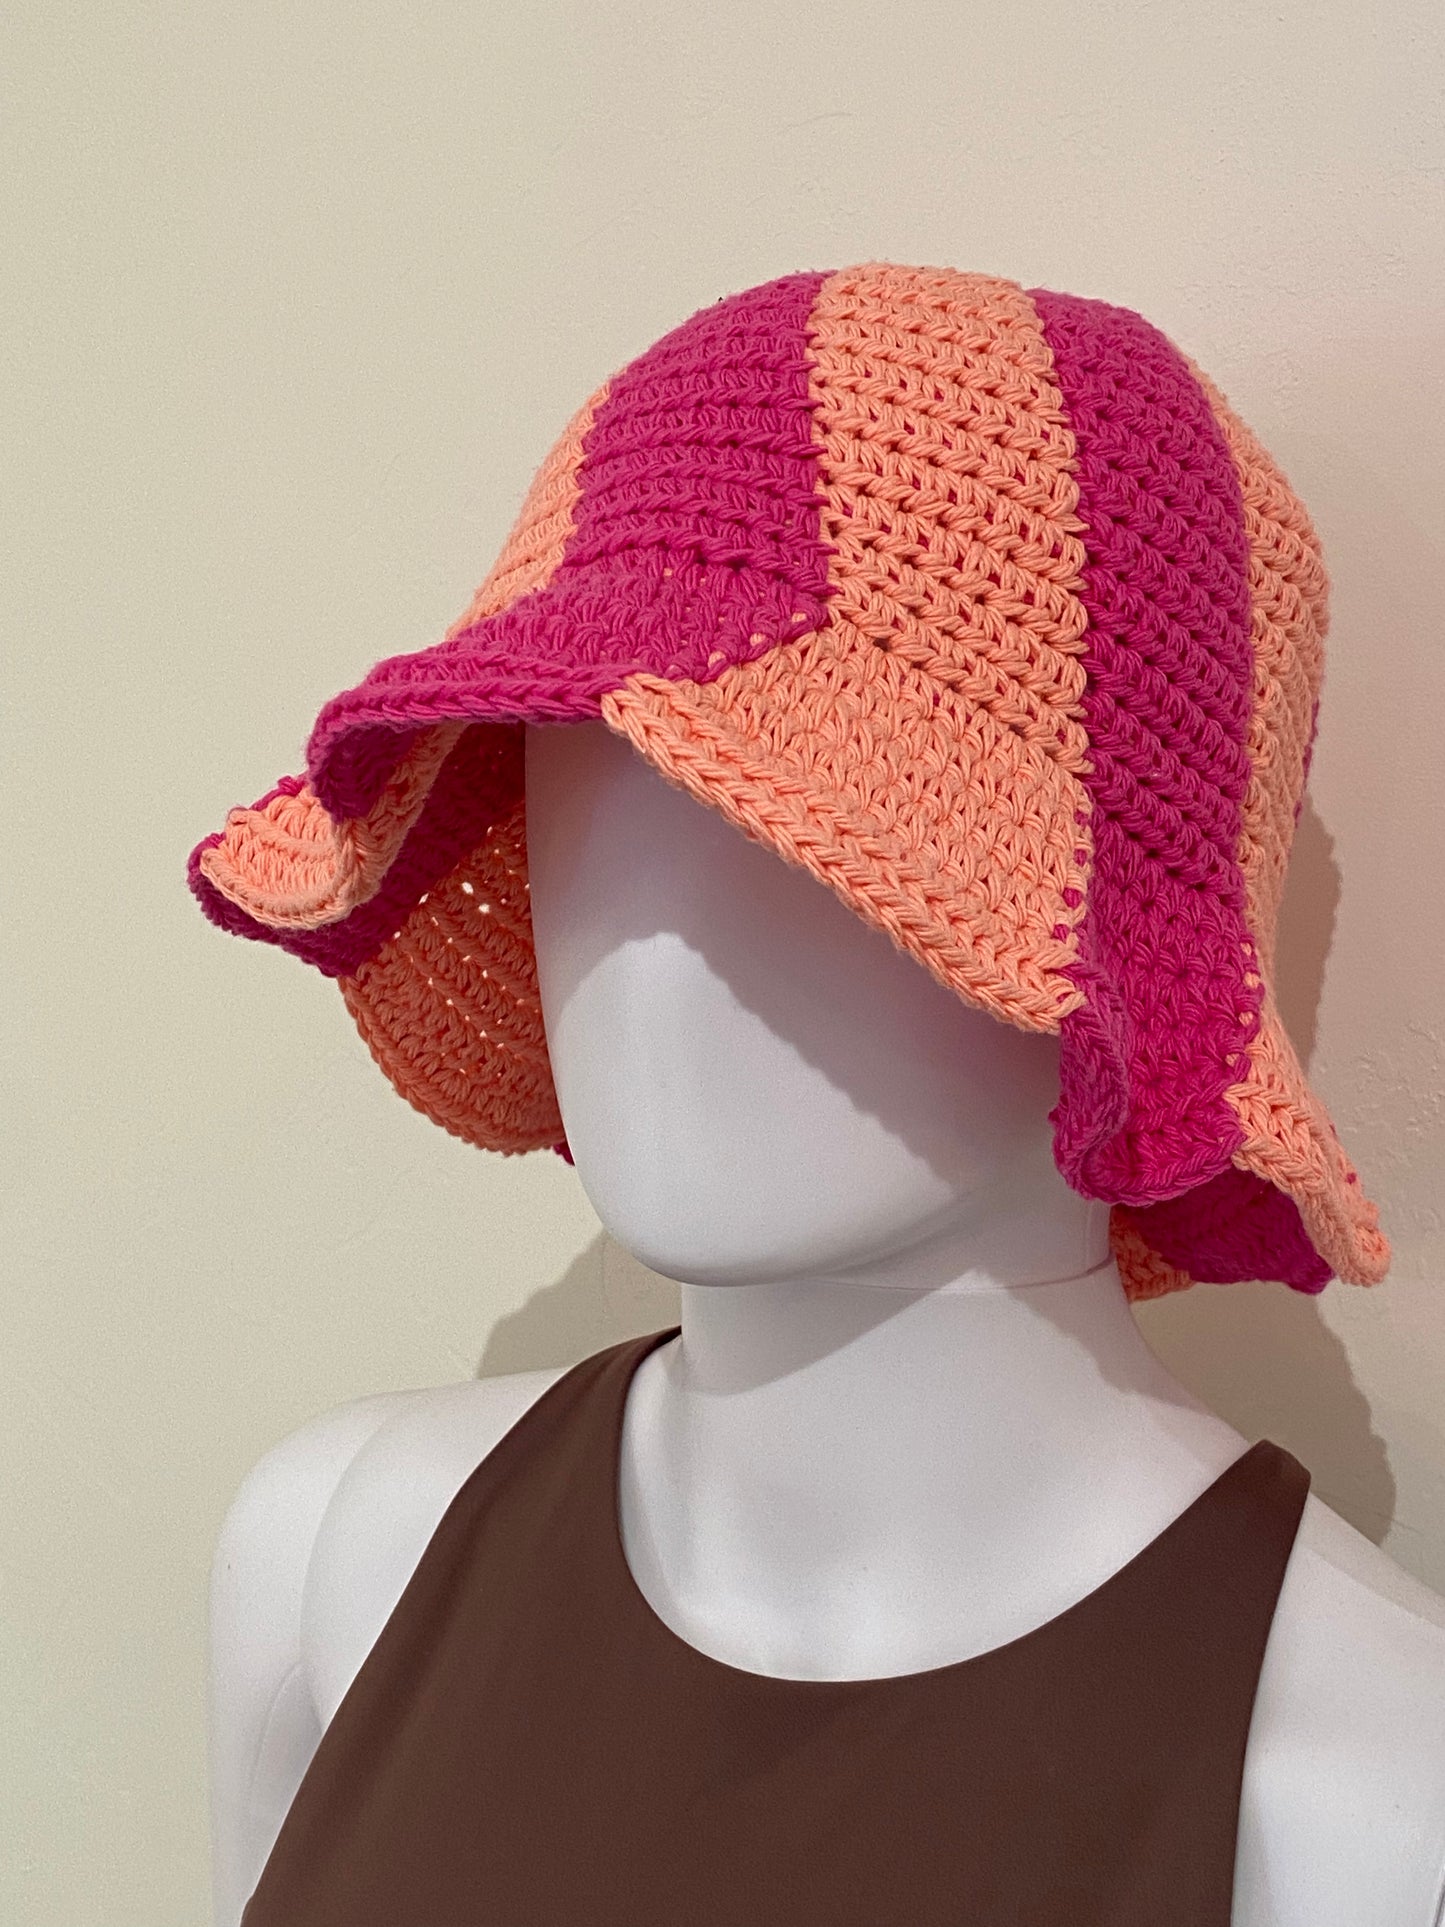 Crochet Hat by Clever Stitches - Sherbet Swirl